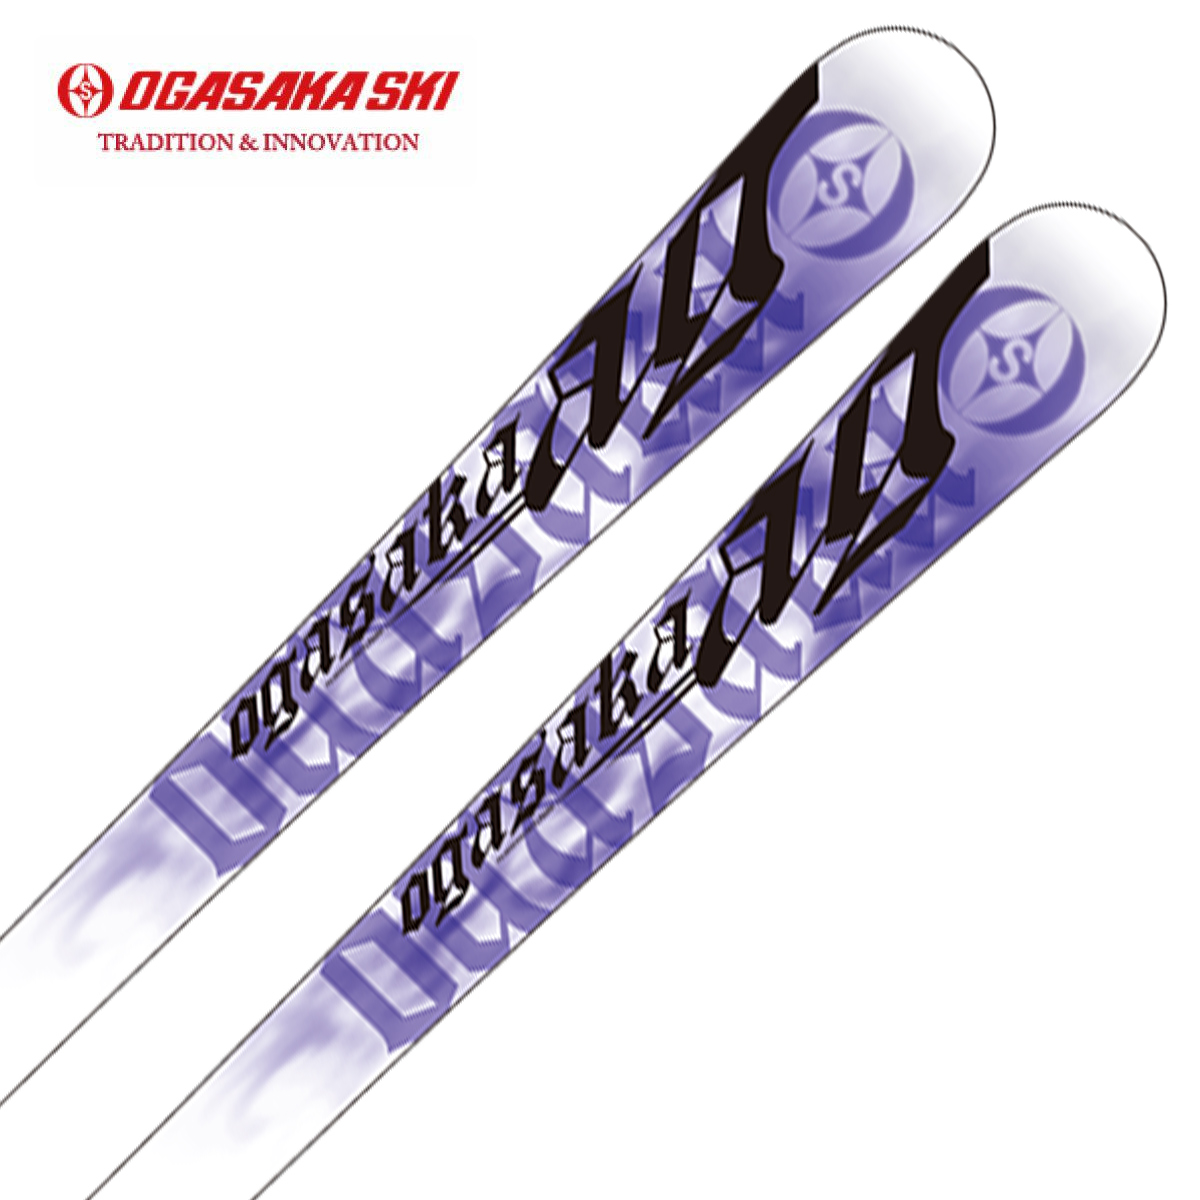 Ski Gear and Japanese Traditional Product - World shipping service 